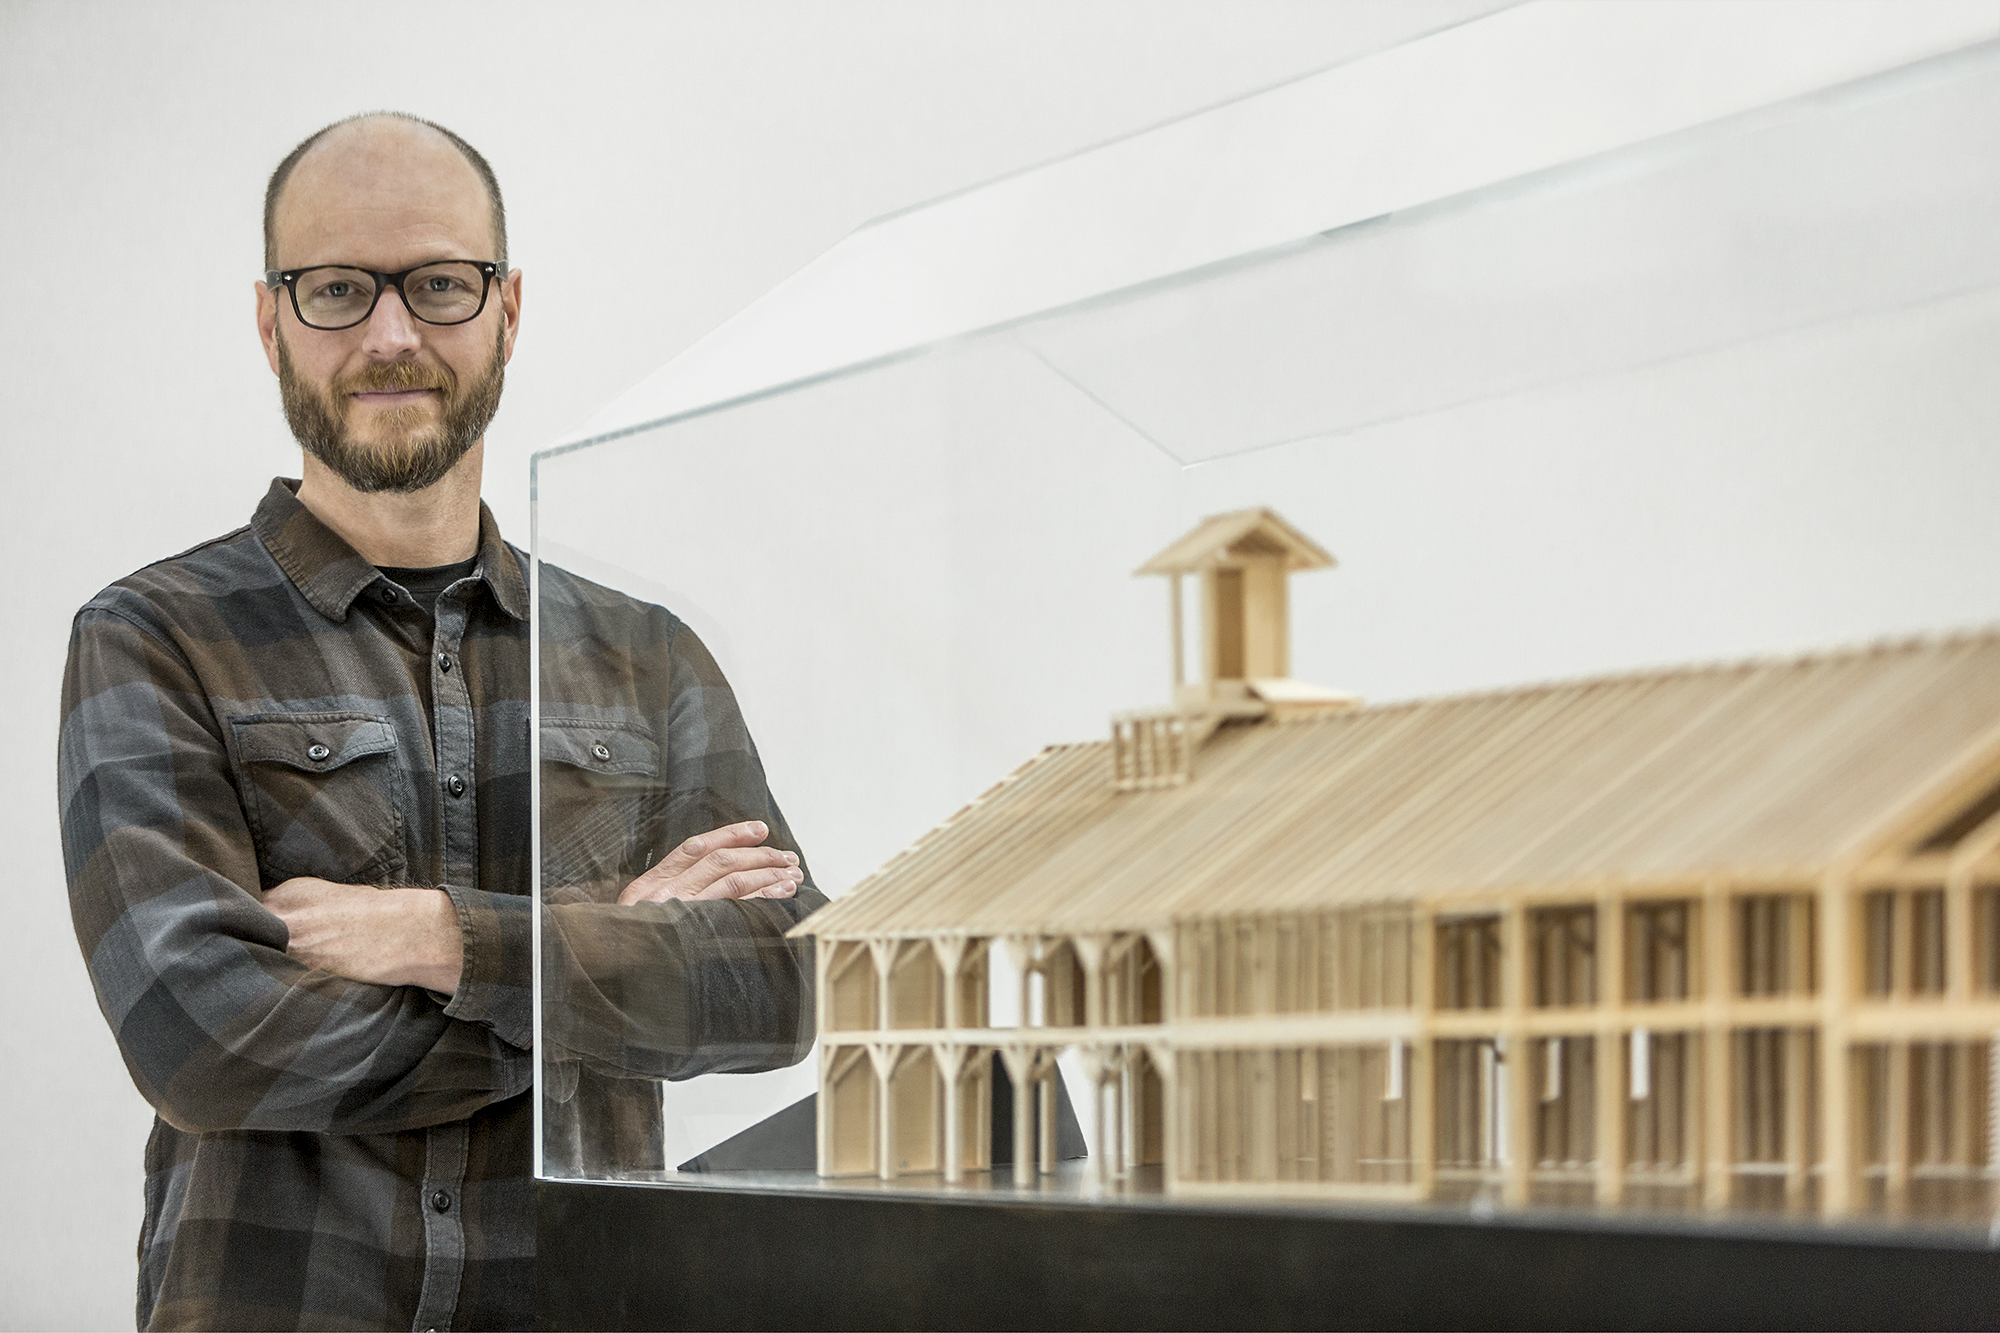 American Institute of Architects elevates Vermont Architect Brian Mac to College of Fellows